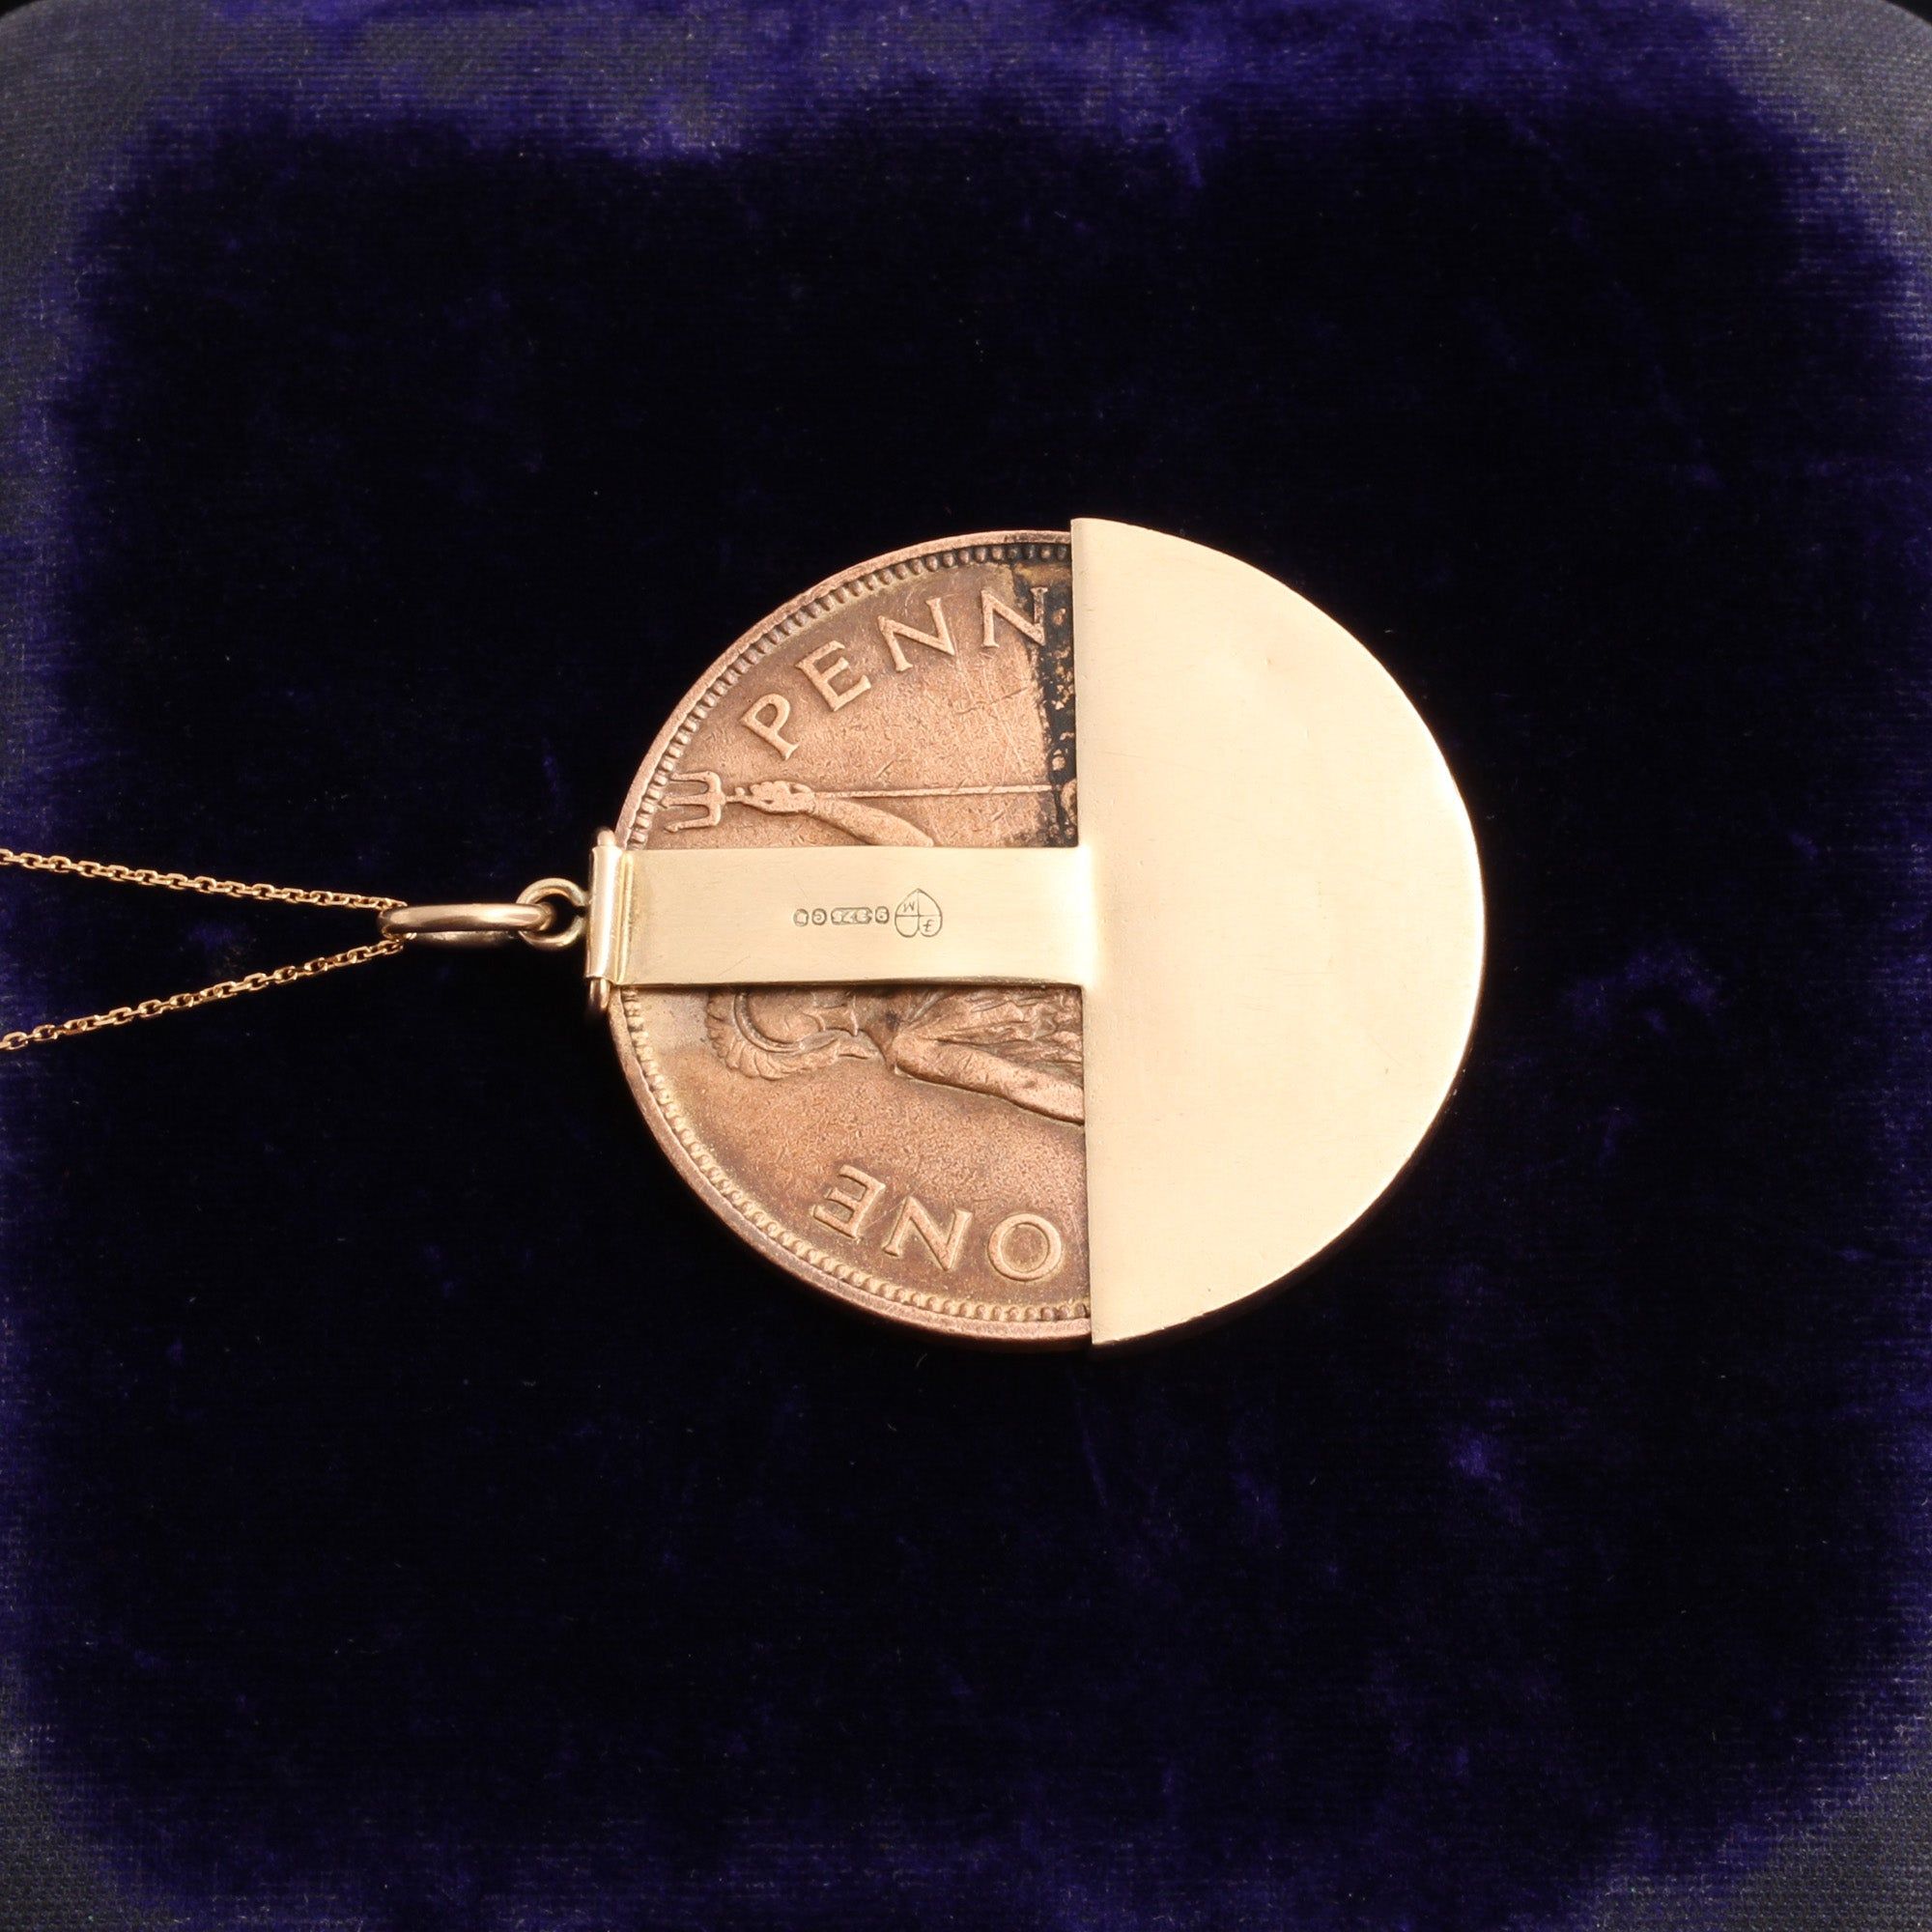 Vintage Penny Loo Charm Necklace